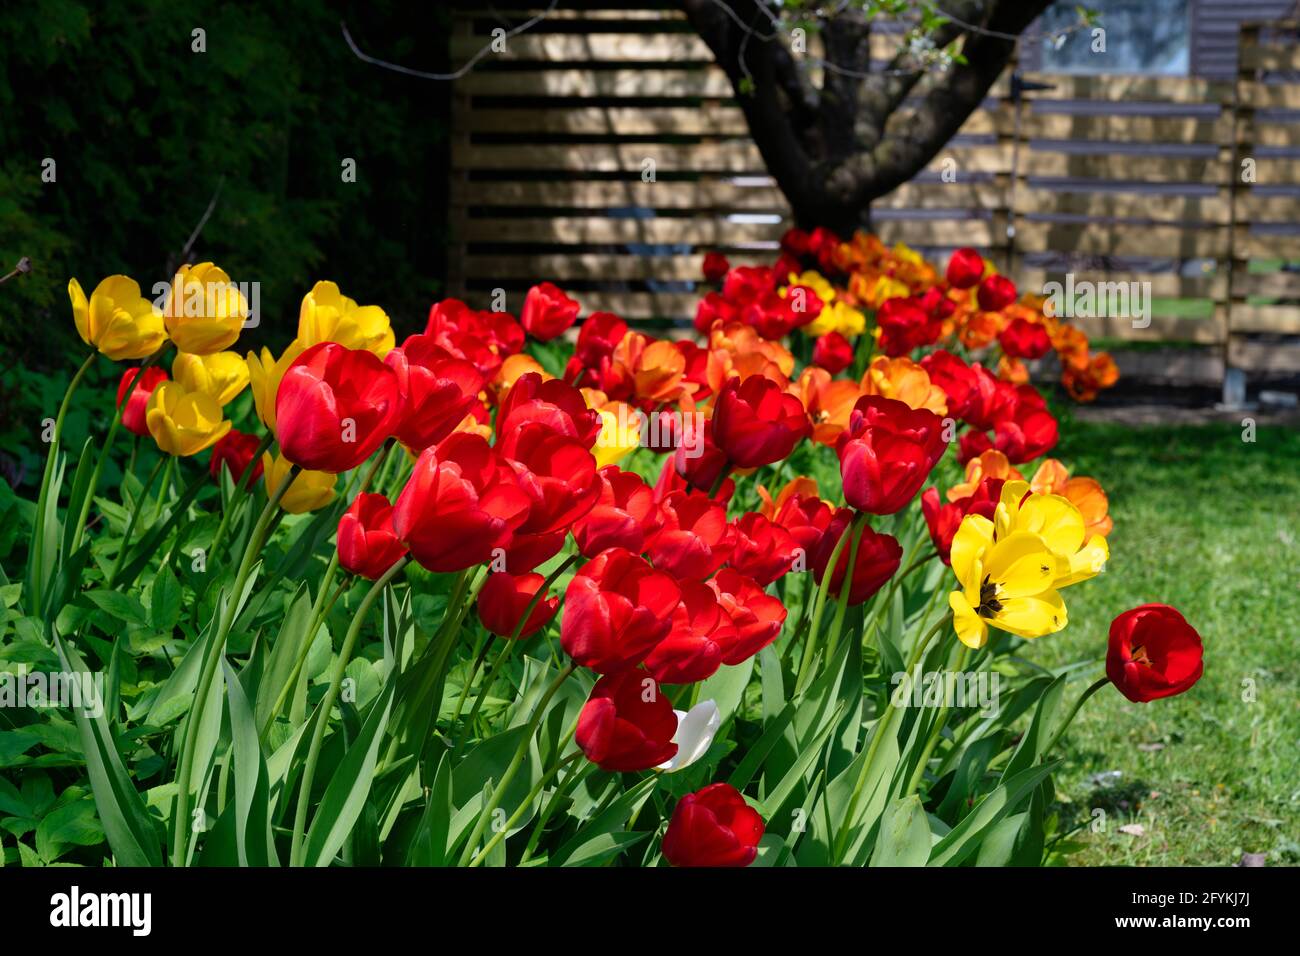 A closeup picture of red and yellow tulip flowers in a garden. Blurry bushes and blue sky in the background Stock Photo